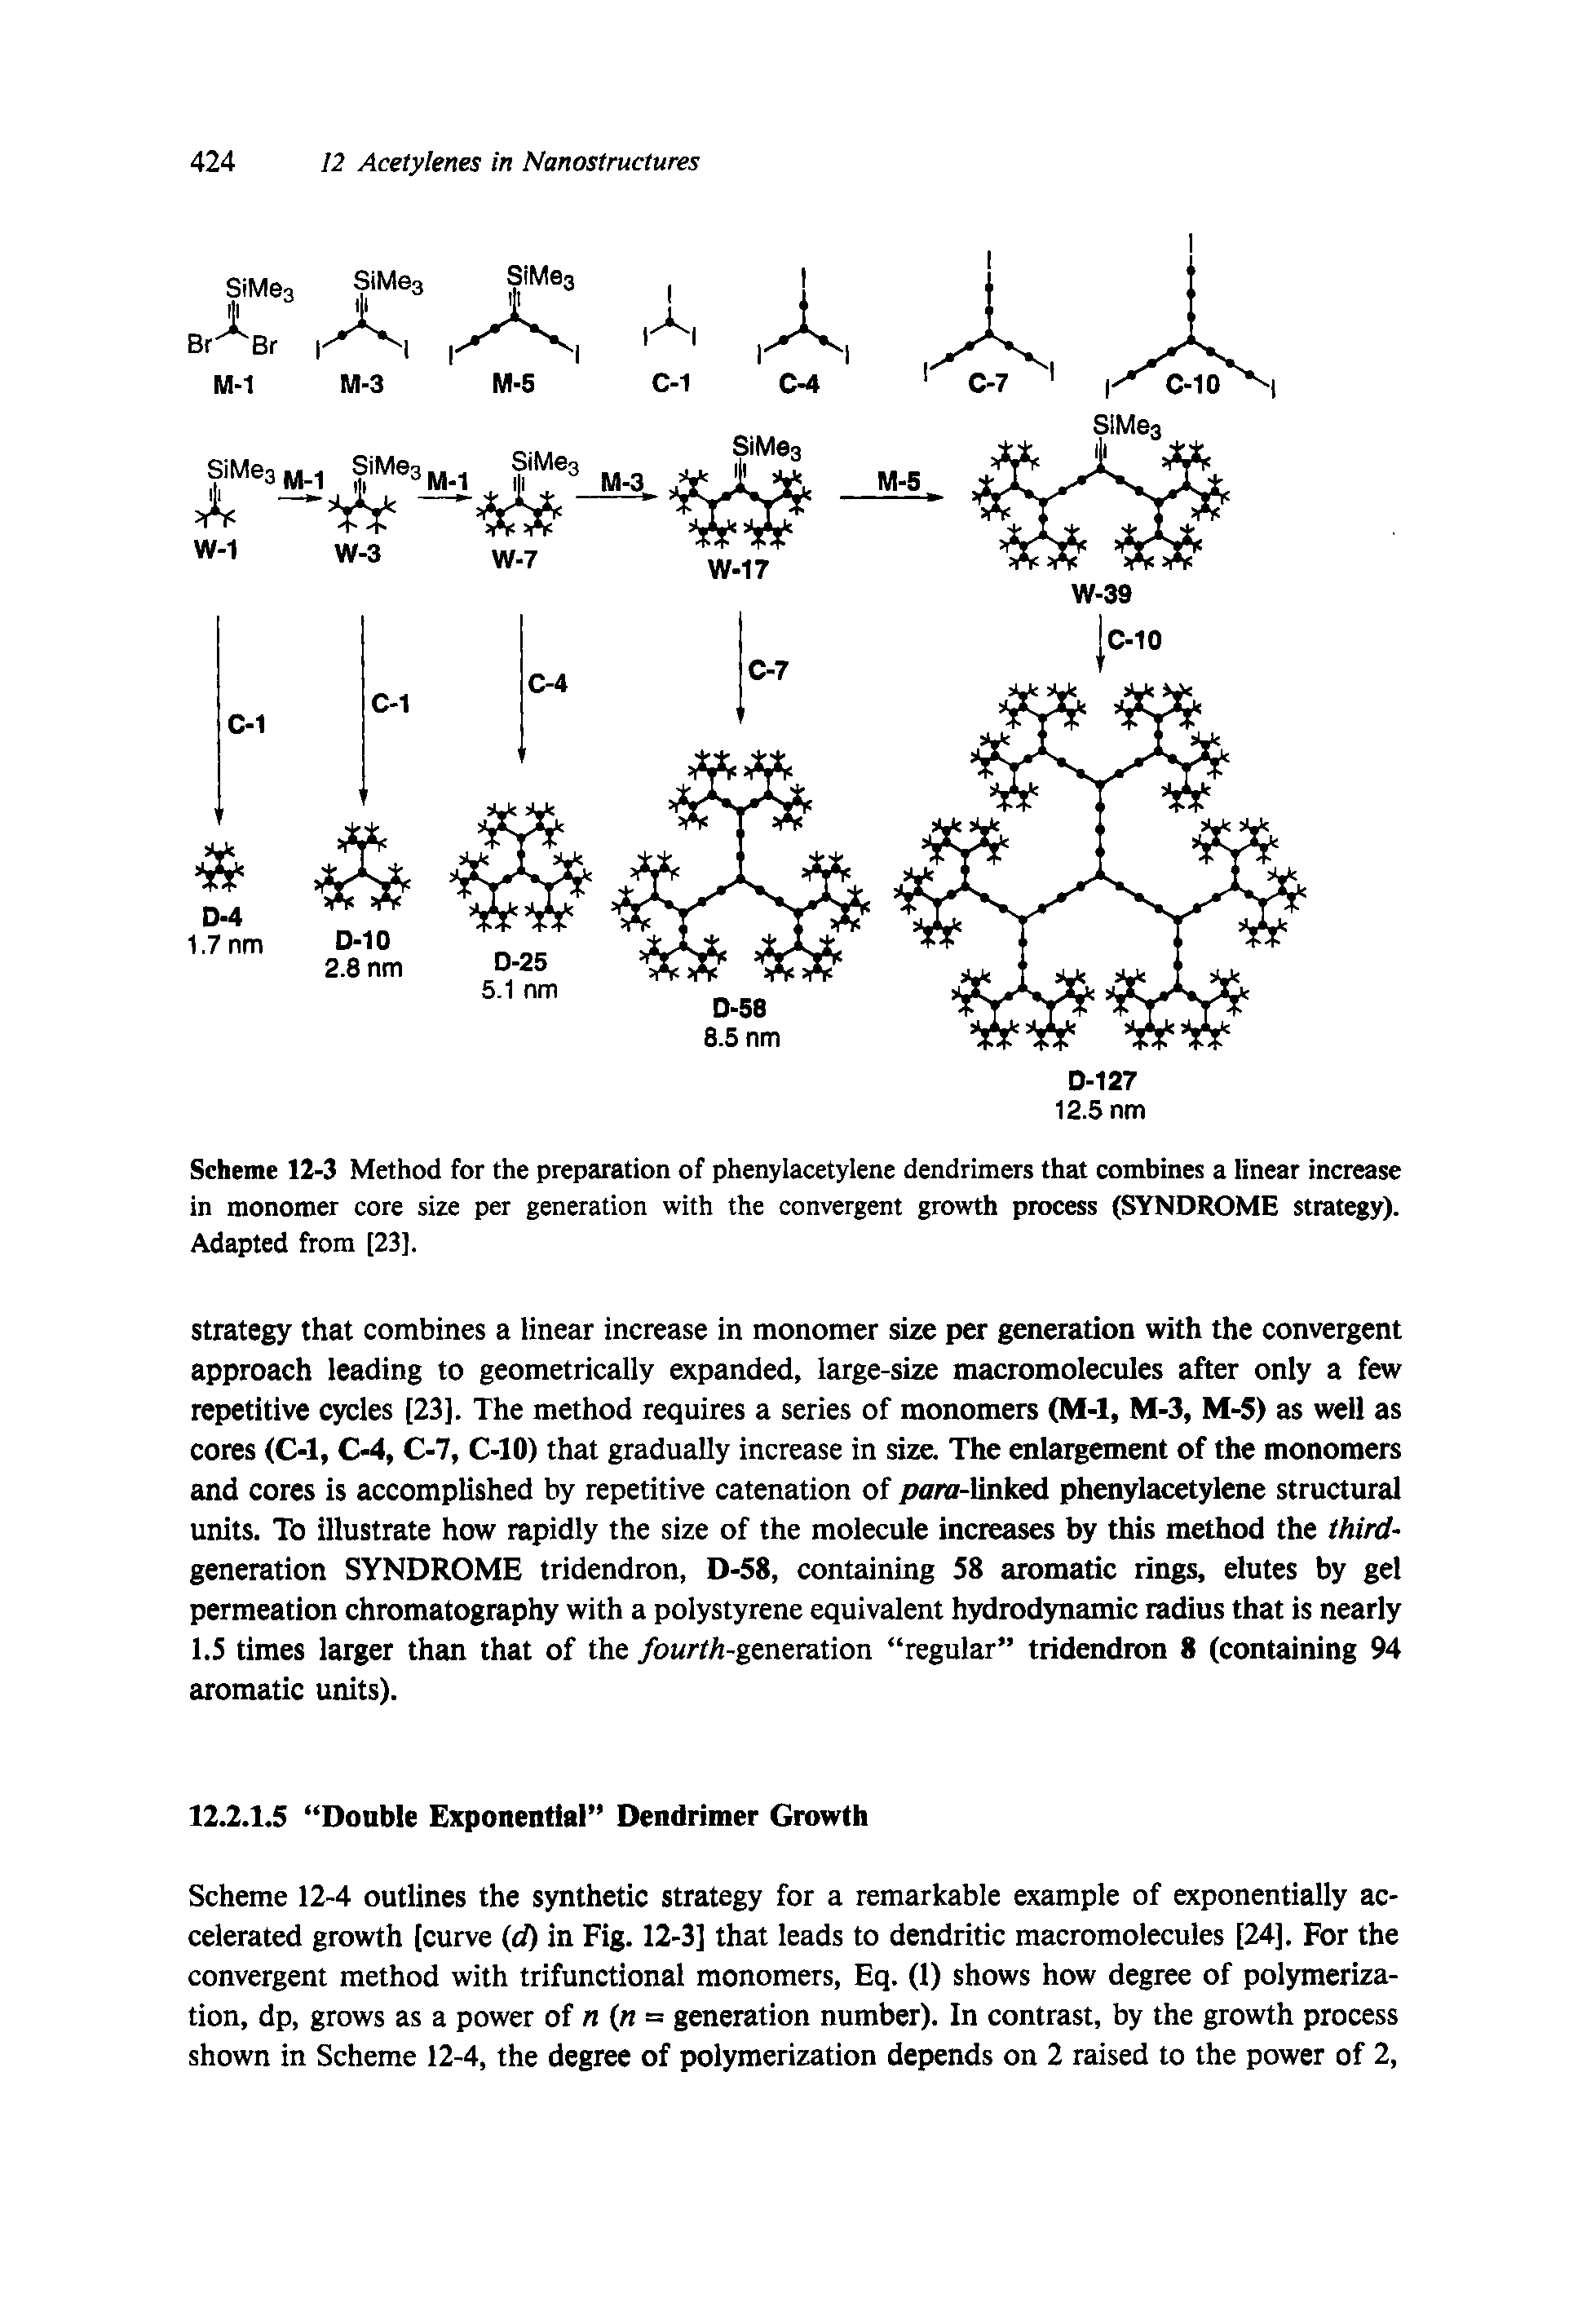 Scheme 12-3 Method for the preparation of phenylacetylene dendrimers that combines a linear increase in monomer core size per generation with the convergent growth process (SYNDROME strategy). Adapted from [23].